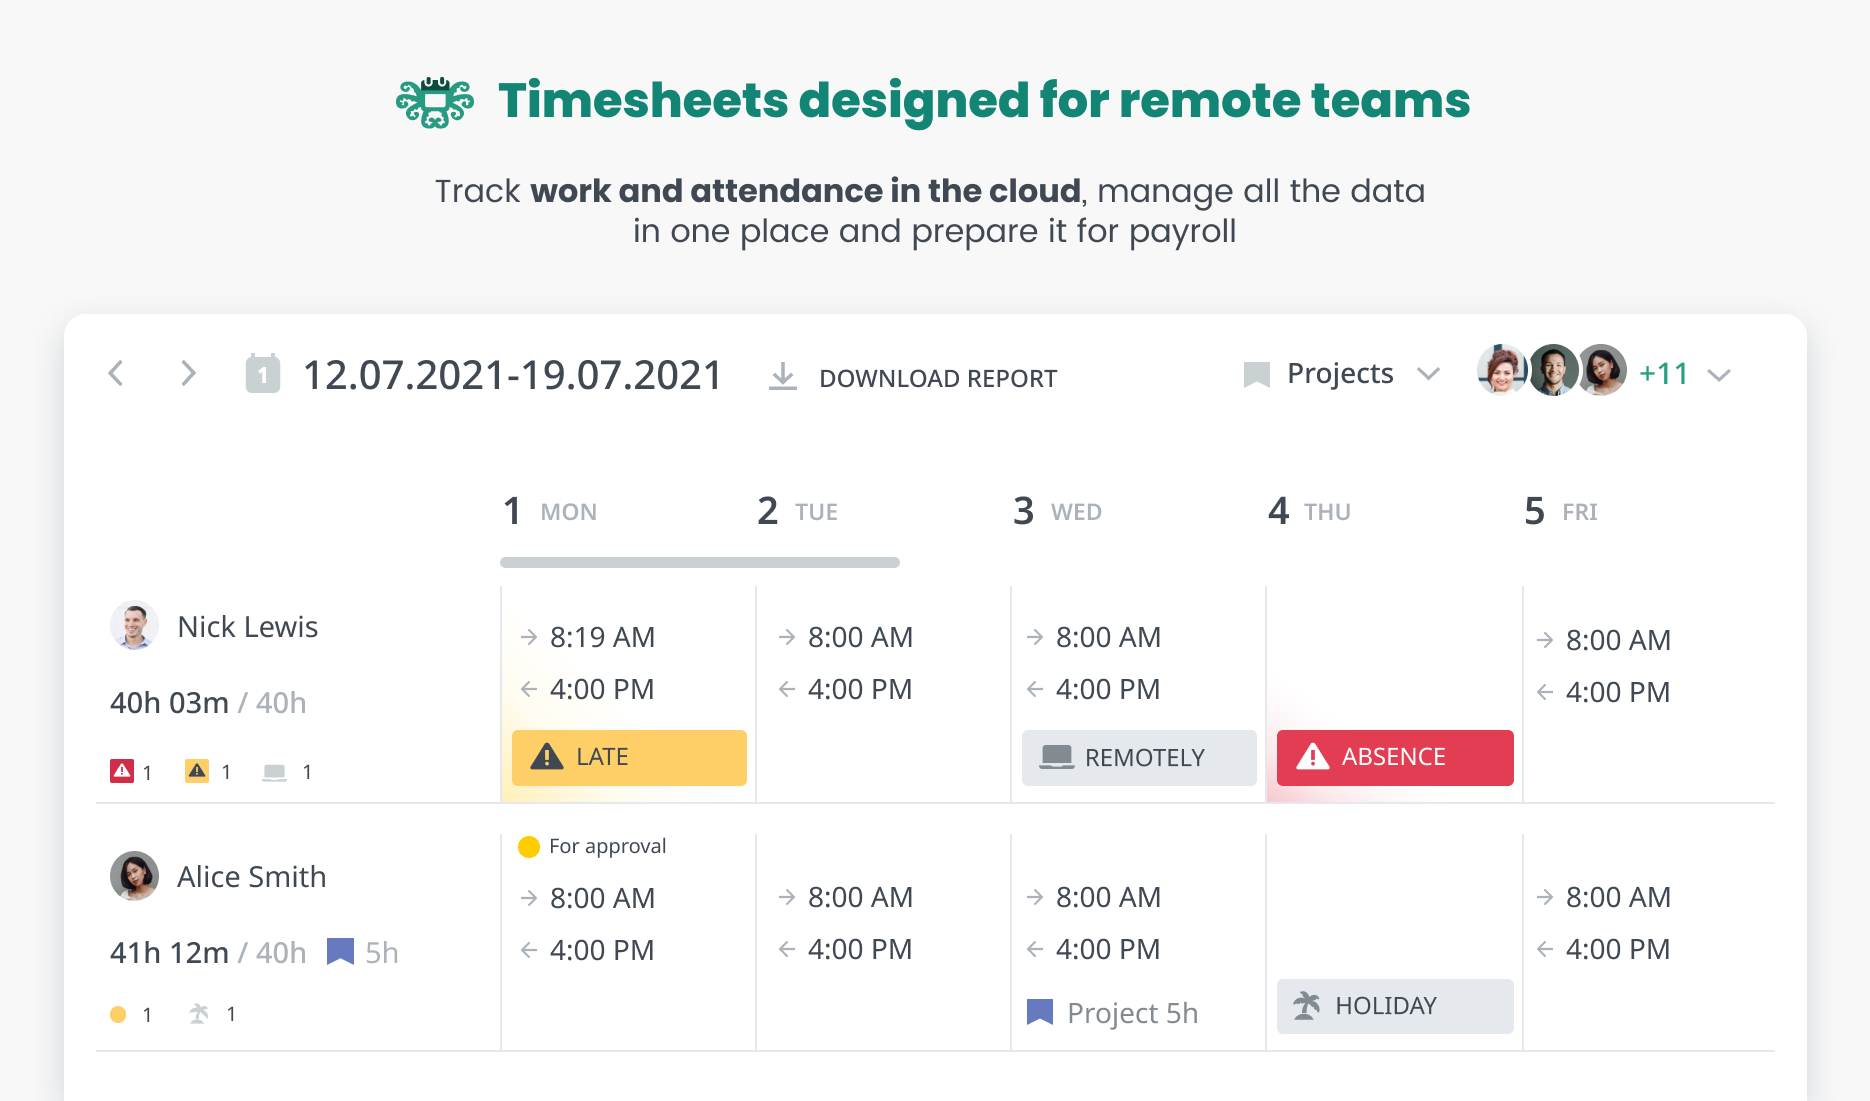 Calamari Software - Online Timesheets with all the details about employees working time. You have a possibility to clock in/out, call a break, add project, and notes